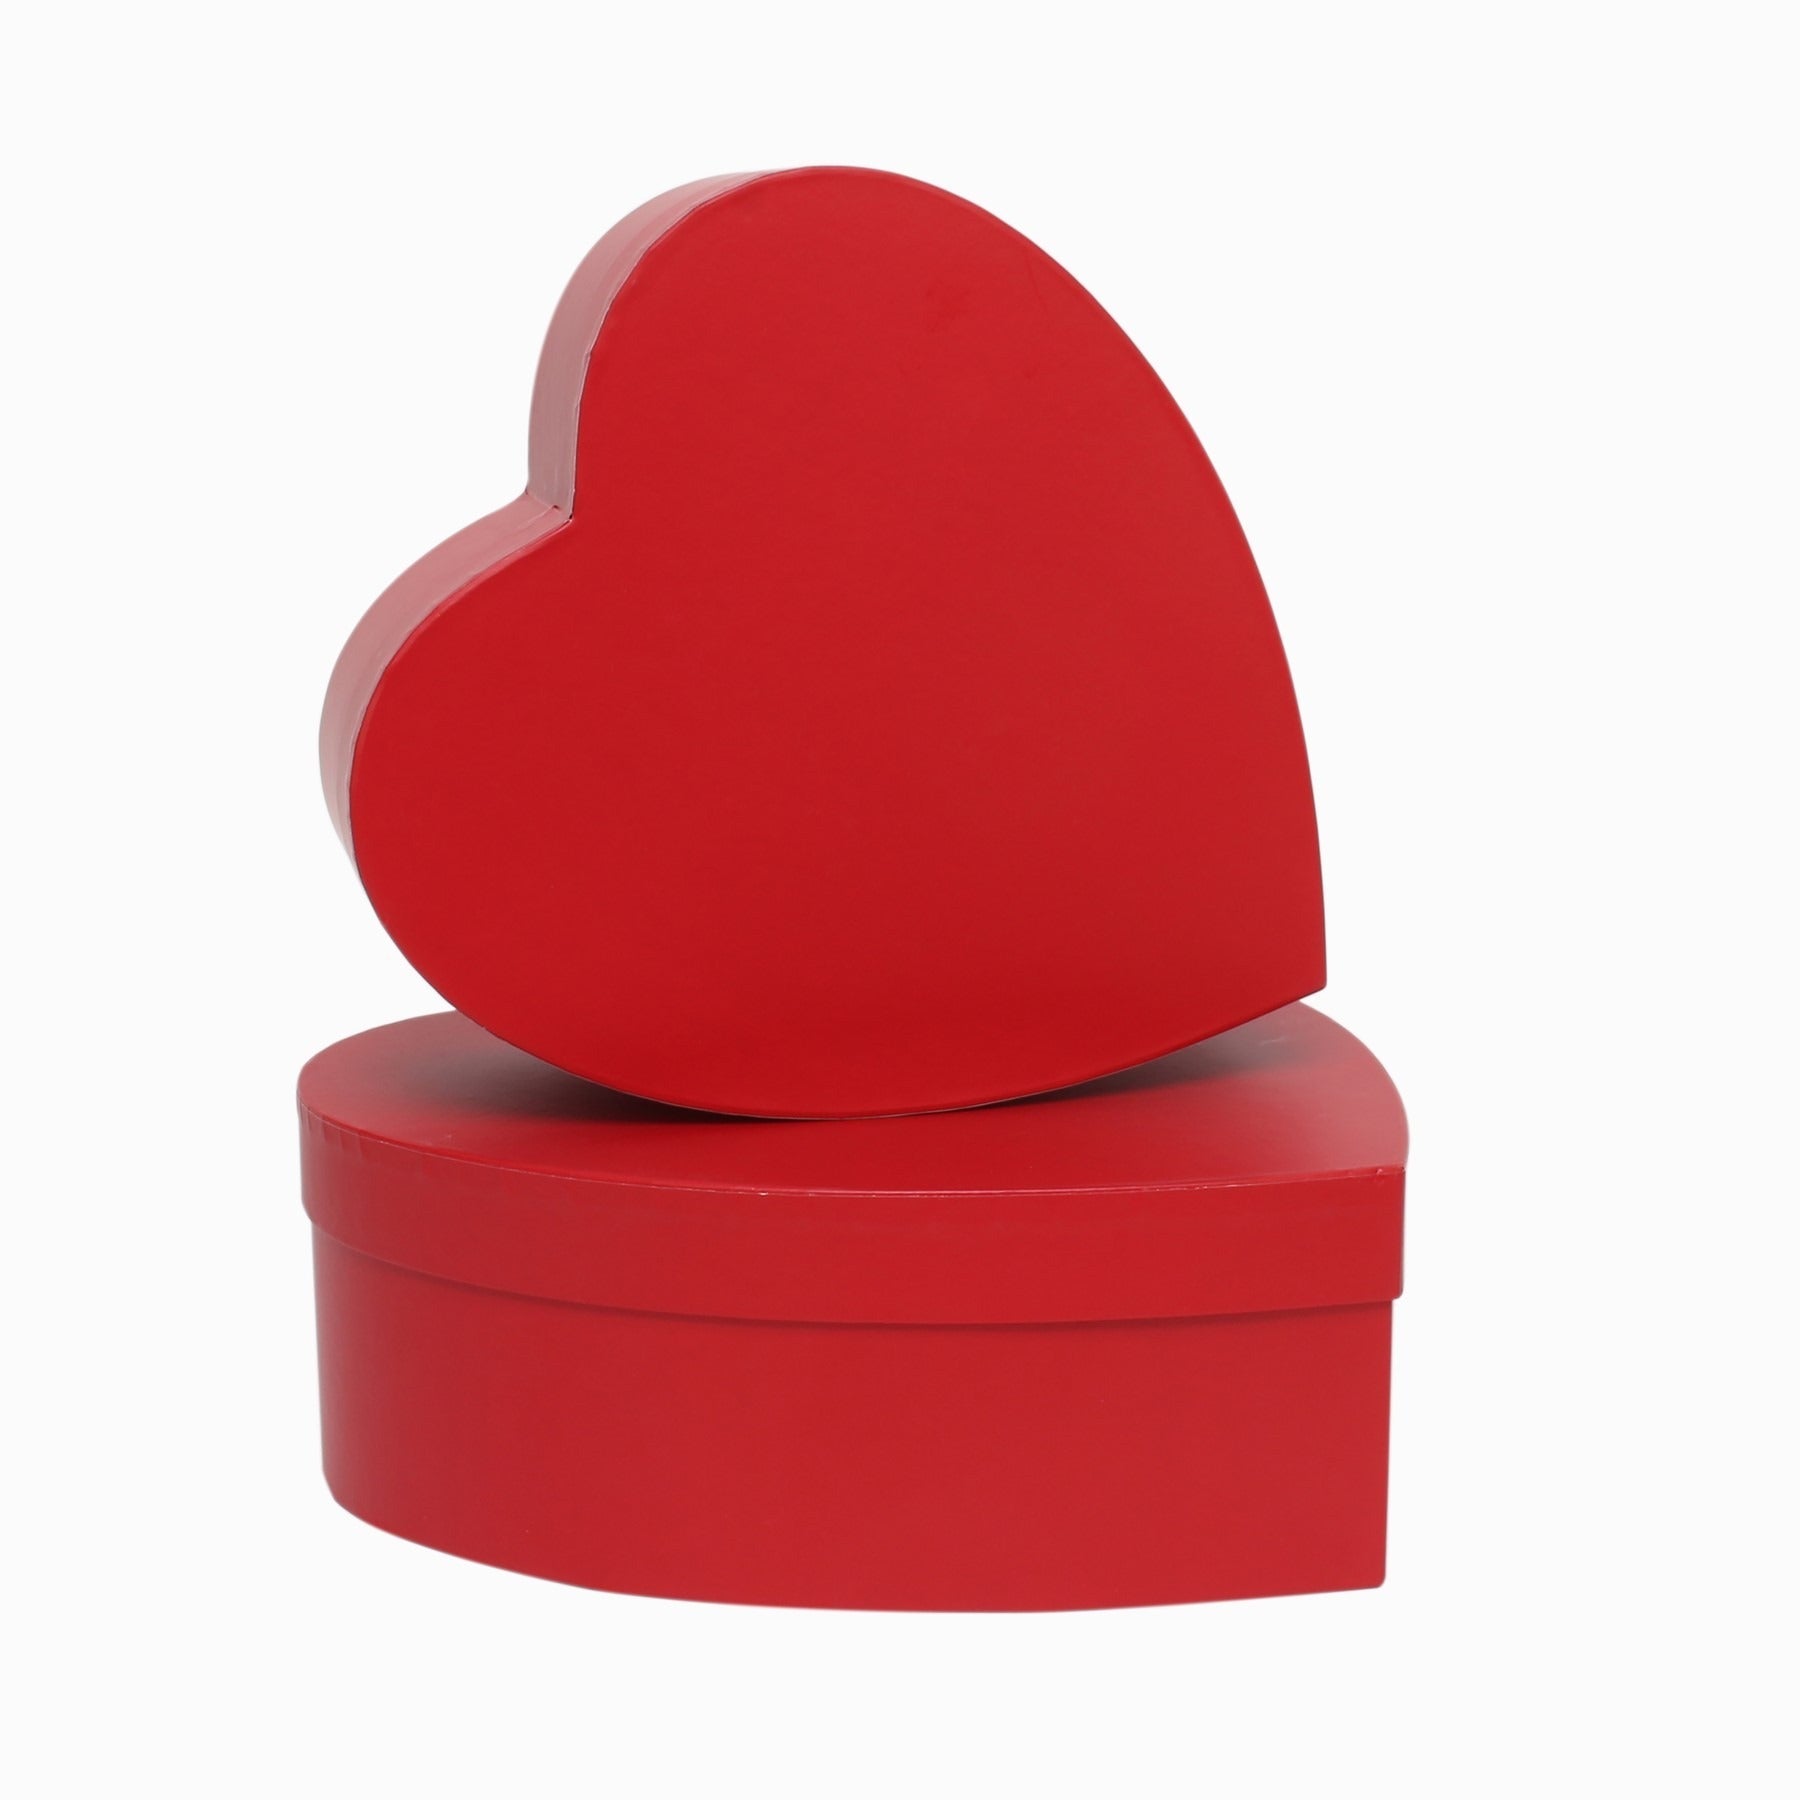 View Red Heart Hat Box Set of 2 information